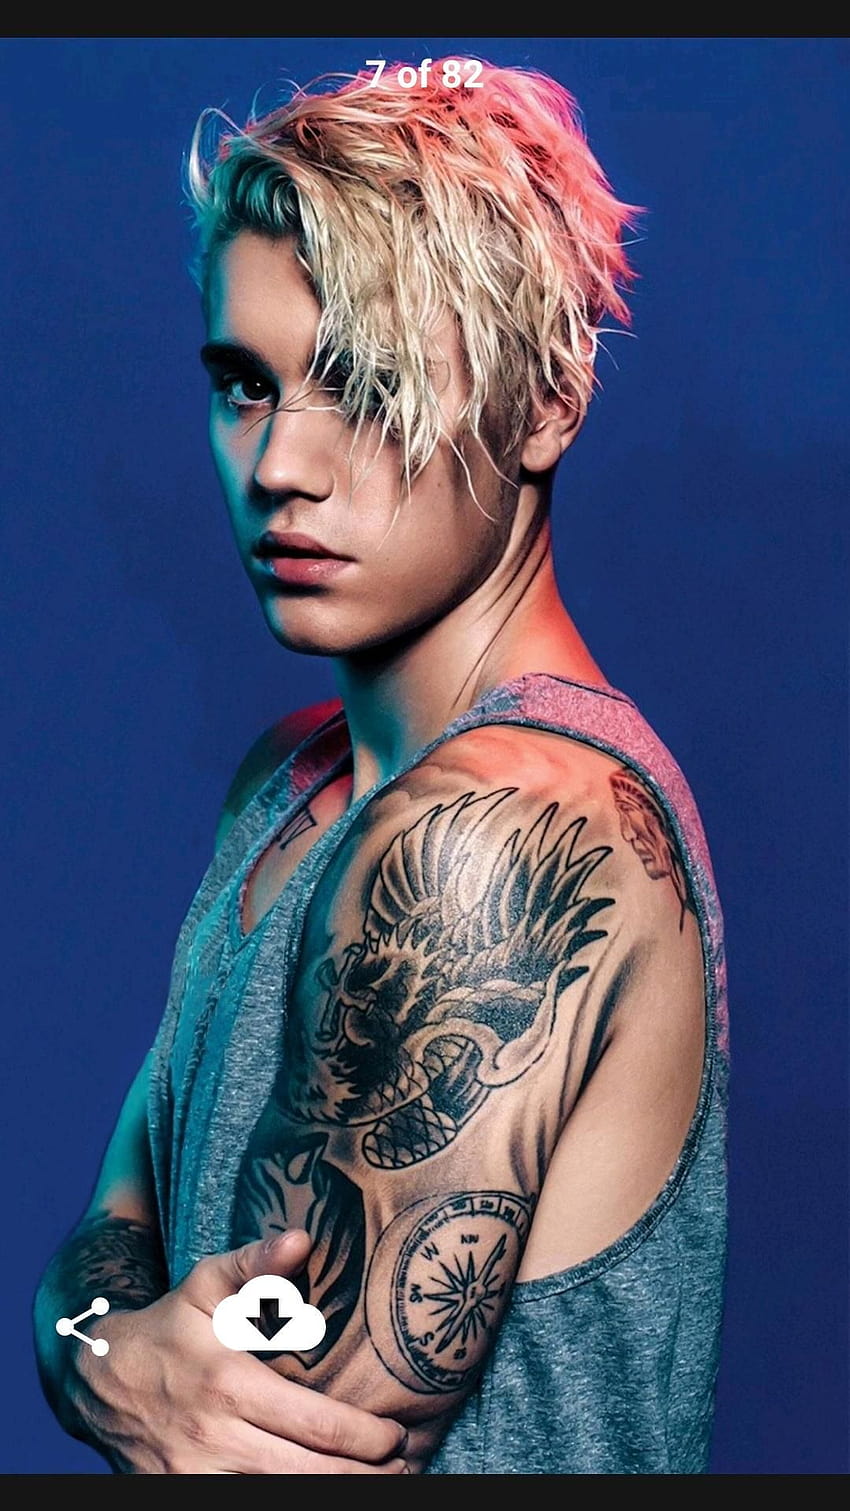 14 Justin Bieber Hairstyles And Hair Cuts - Celebrities